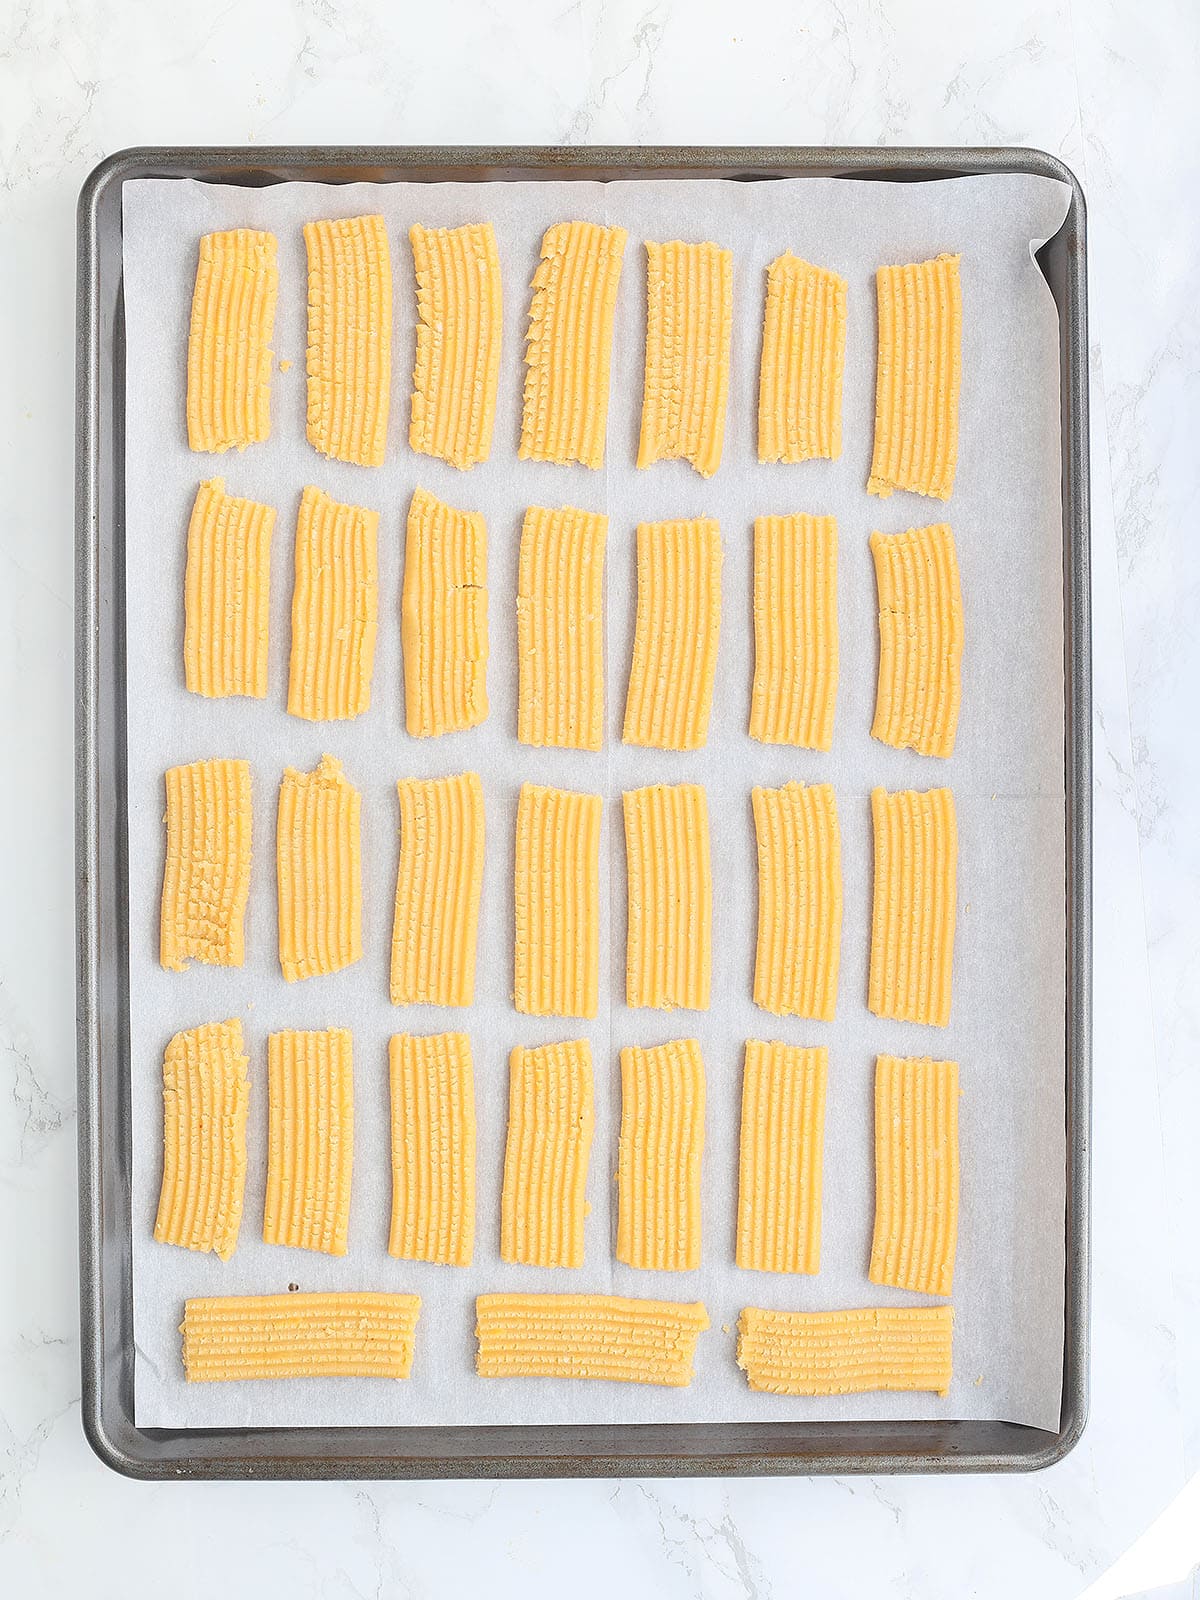 unbaked cheese straw dough on a baking sheet